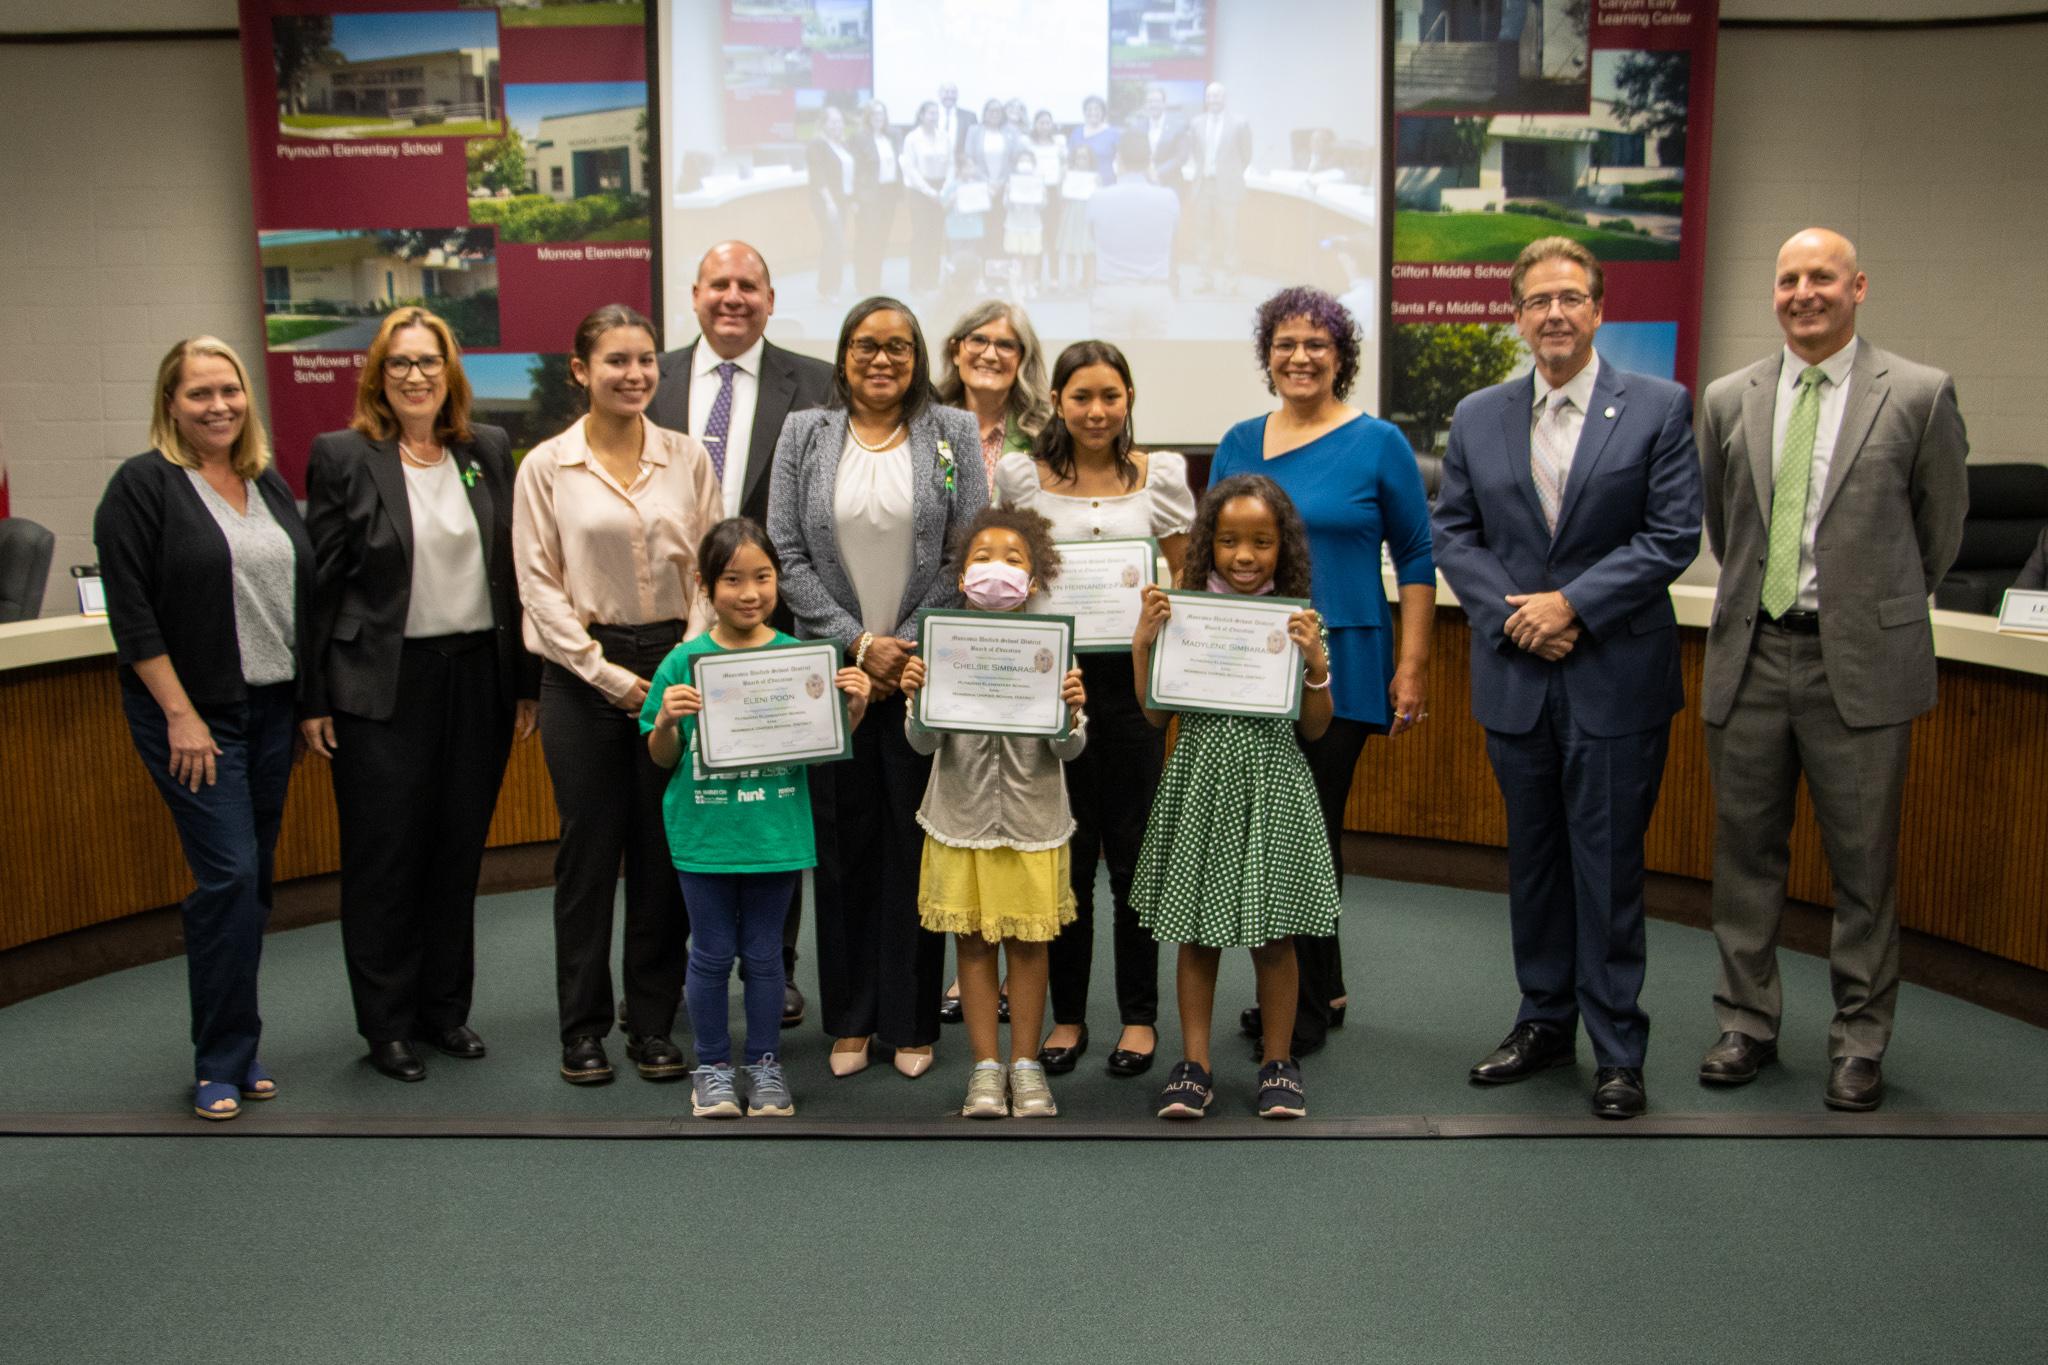 The Monrovia Unified Board of Education invited students from Plymouth Elementary School and MHS to lead the May meetings in the Pledge of Allegiance.